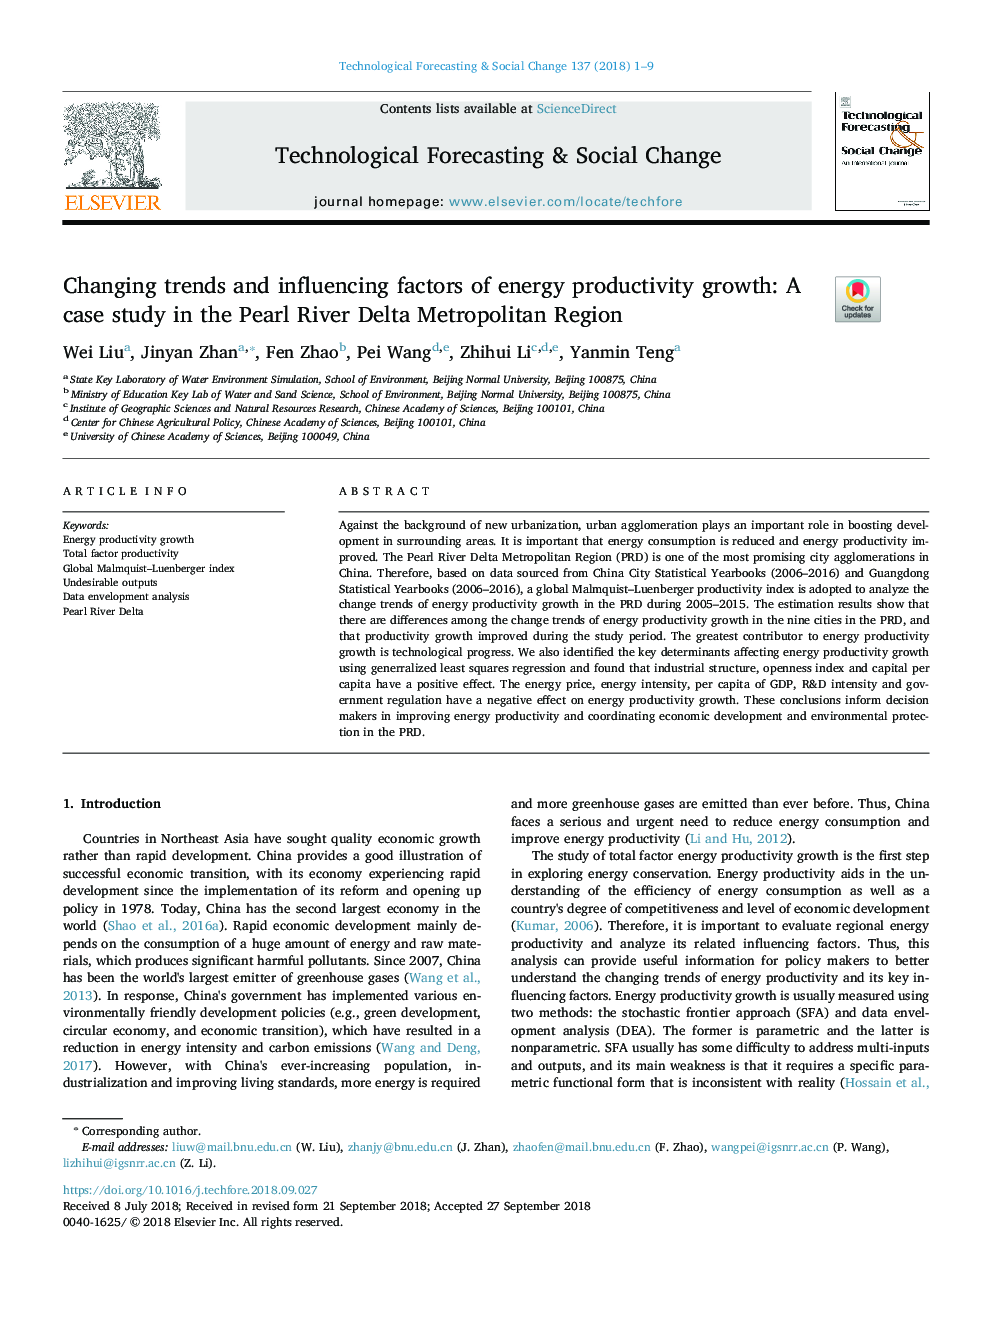 Changing trends and influencing factors of energy productivity growth: A case study in the Pearl River Delta Metropolitan Region